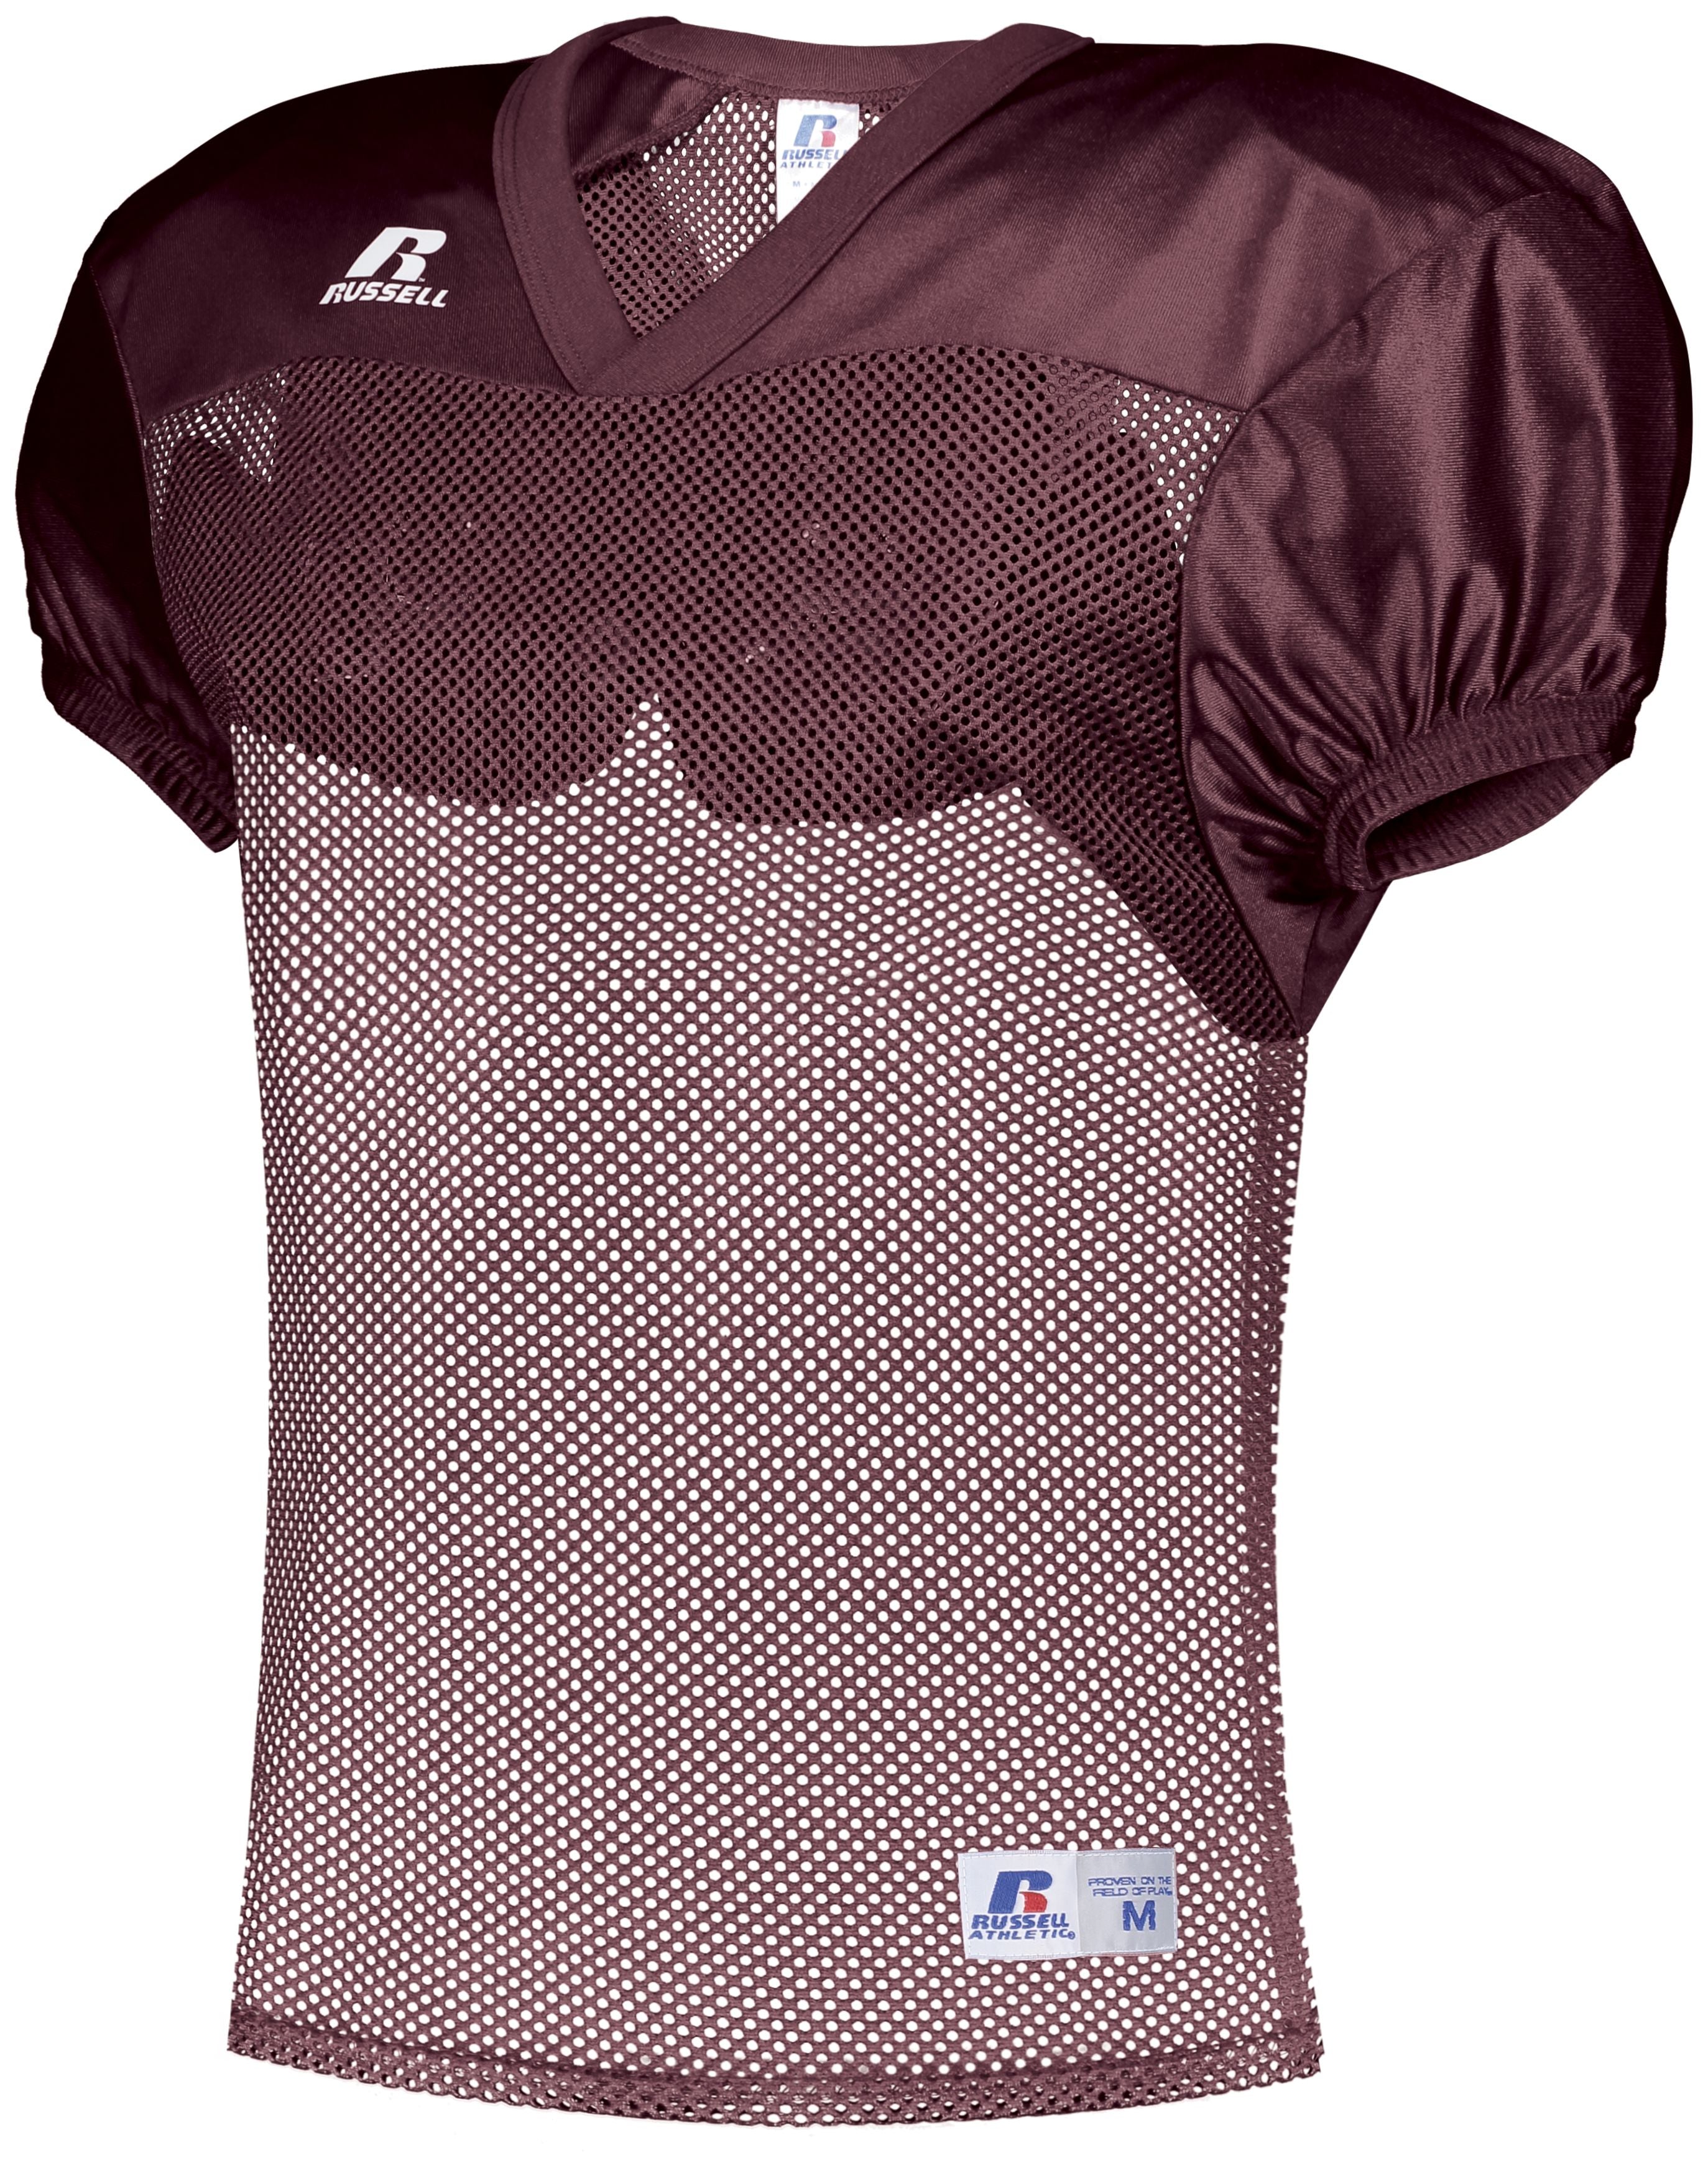 Russell Athletic Youth Stock Practice Jersey in Maroon  -Part of the Youth, Youth-Jersey, Football, Russell-Athletic-Products, Shirts, All-Sports, All-Sports-1 product lines at KanaleyCreations.com